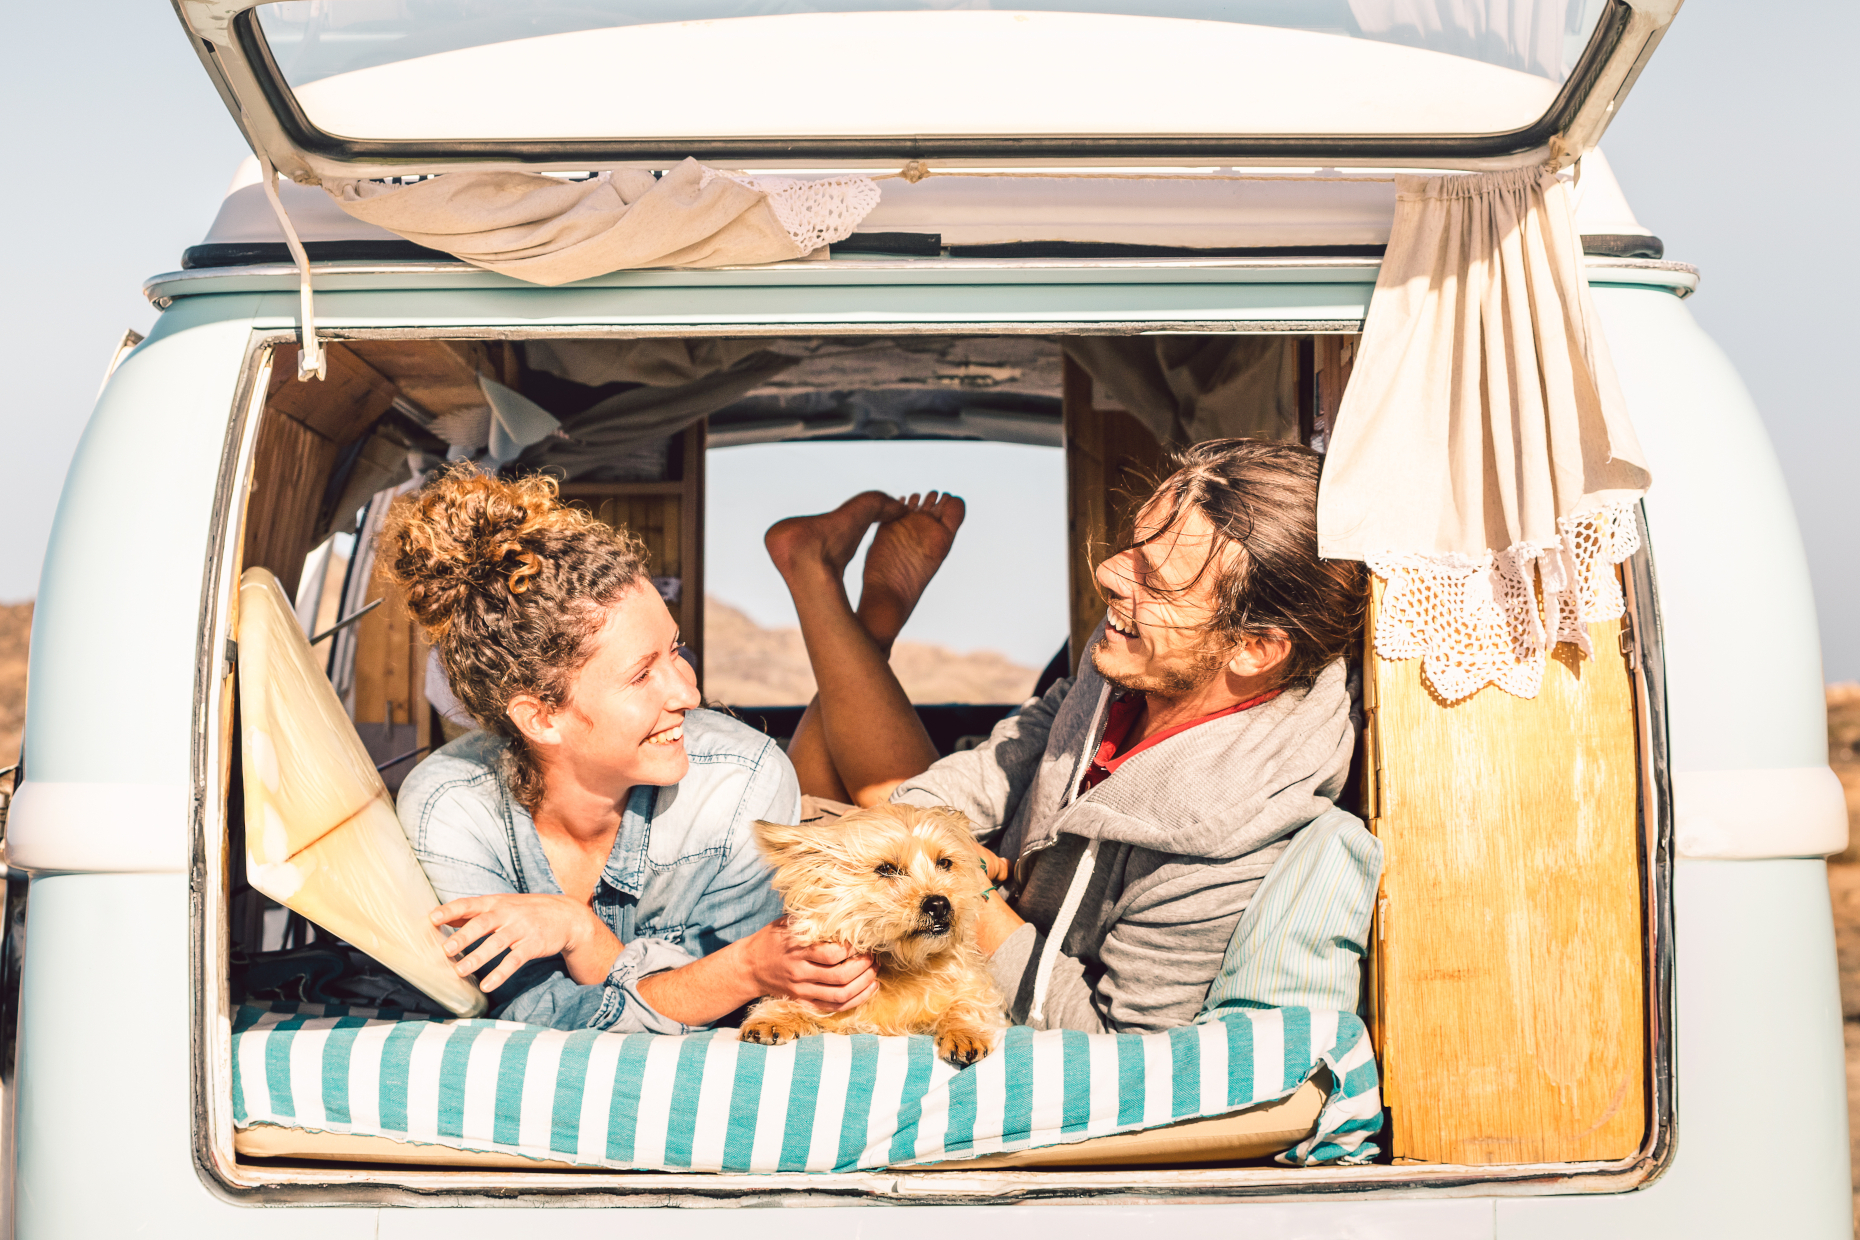 <p>Summer livin’ is all about sharing time with those you love and lingering in sweet locations watching the sunset. So this dog has it made.</p>